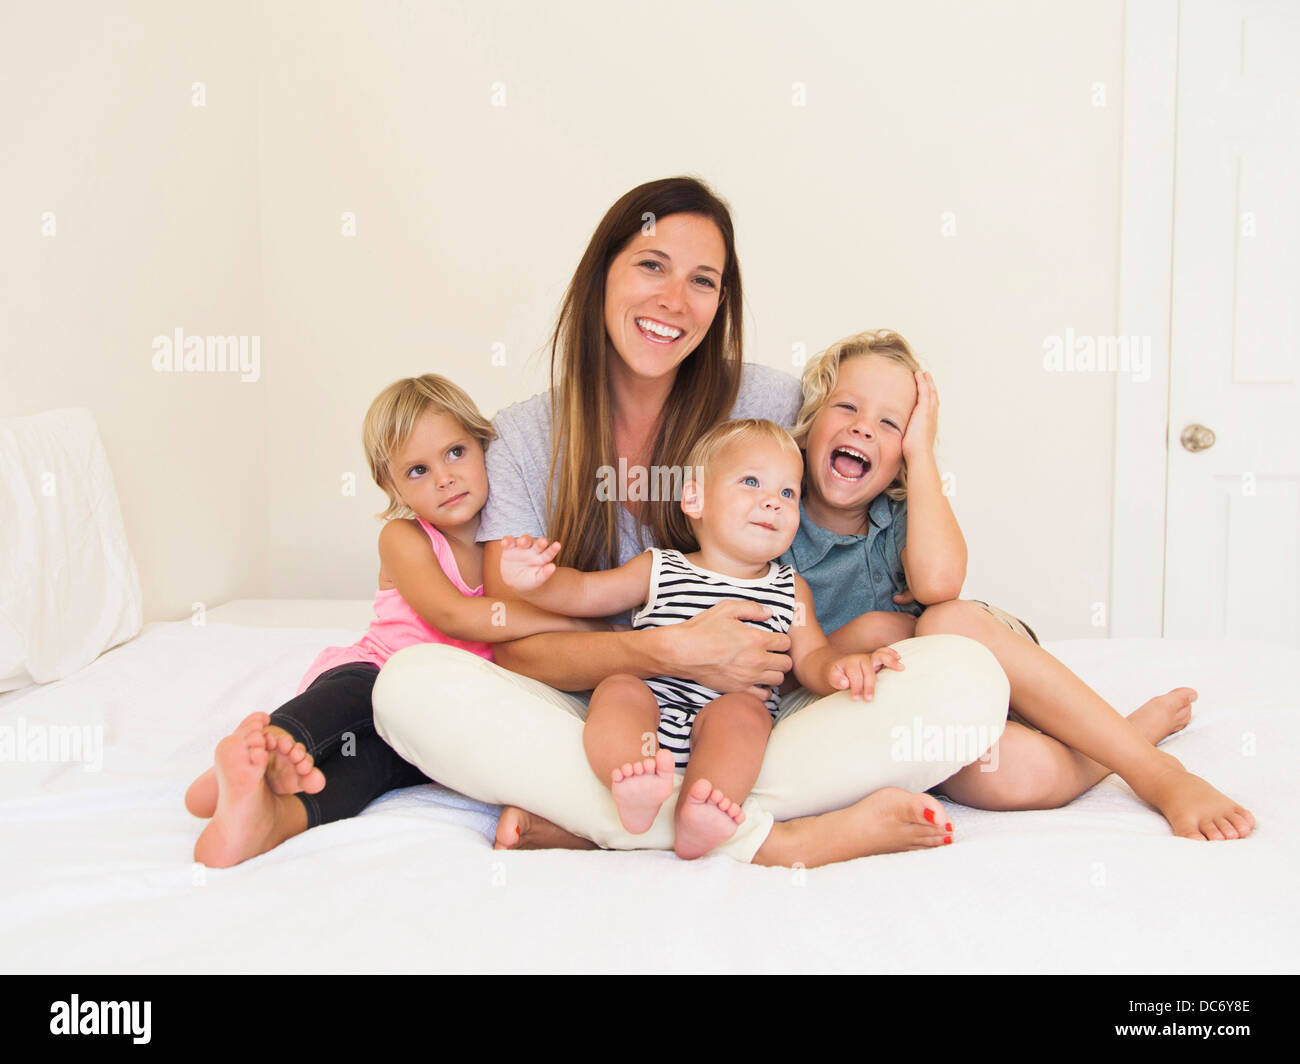 Mother with three kids (6-7, 2-3, 6-11 months) Stock Photo